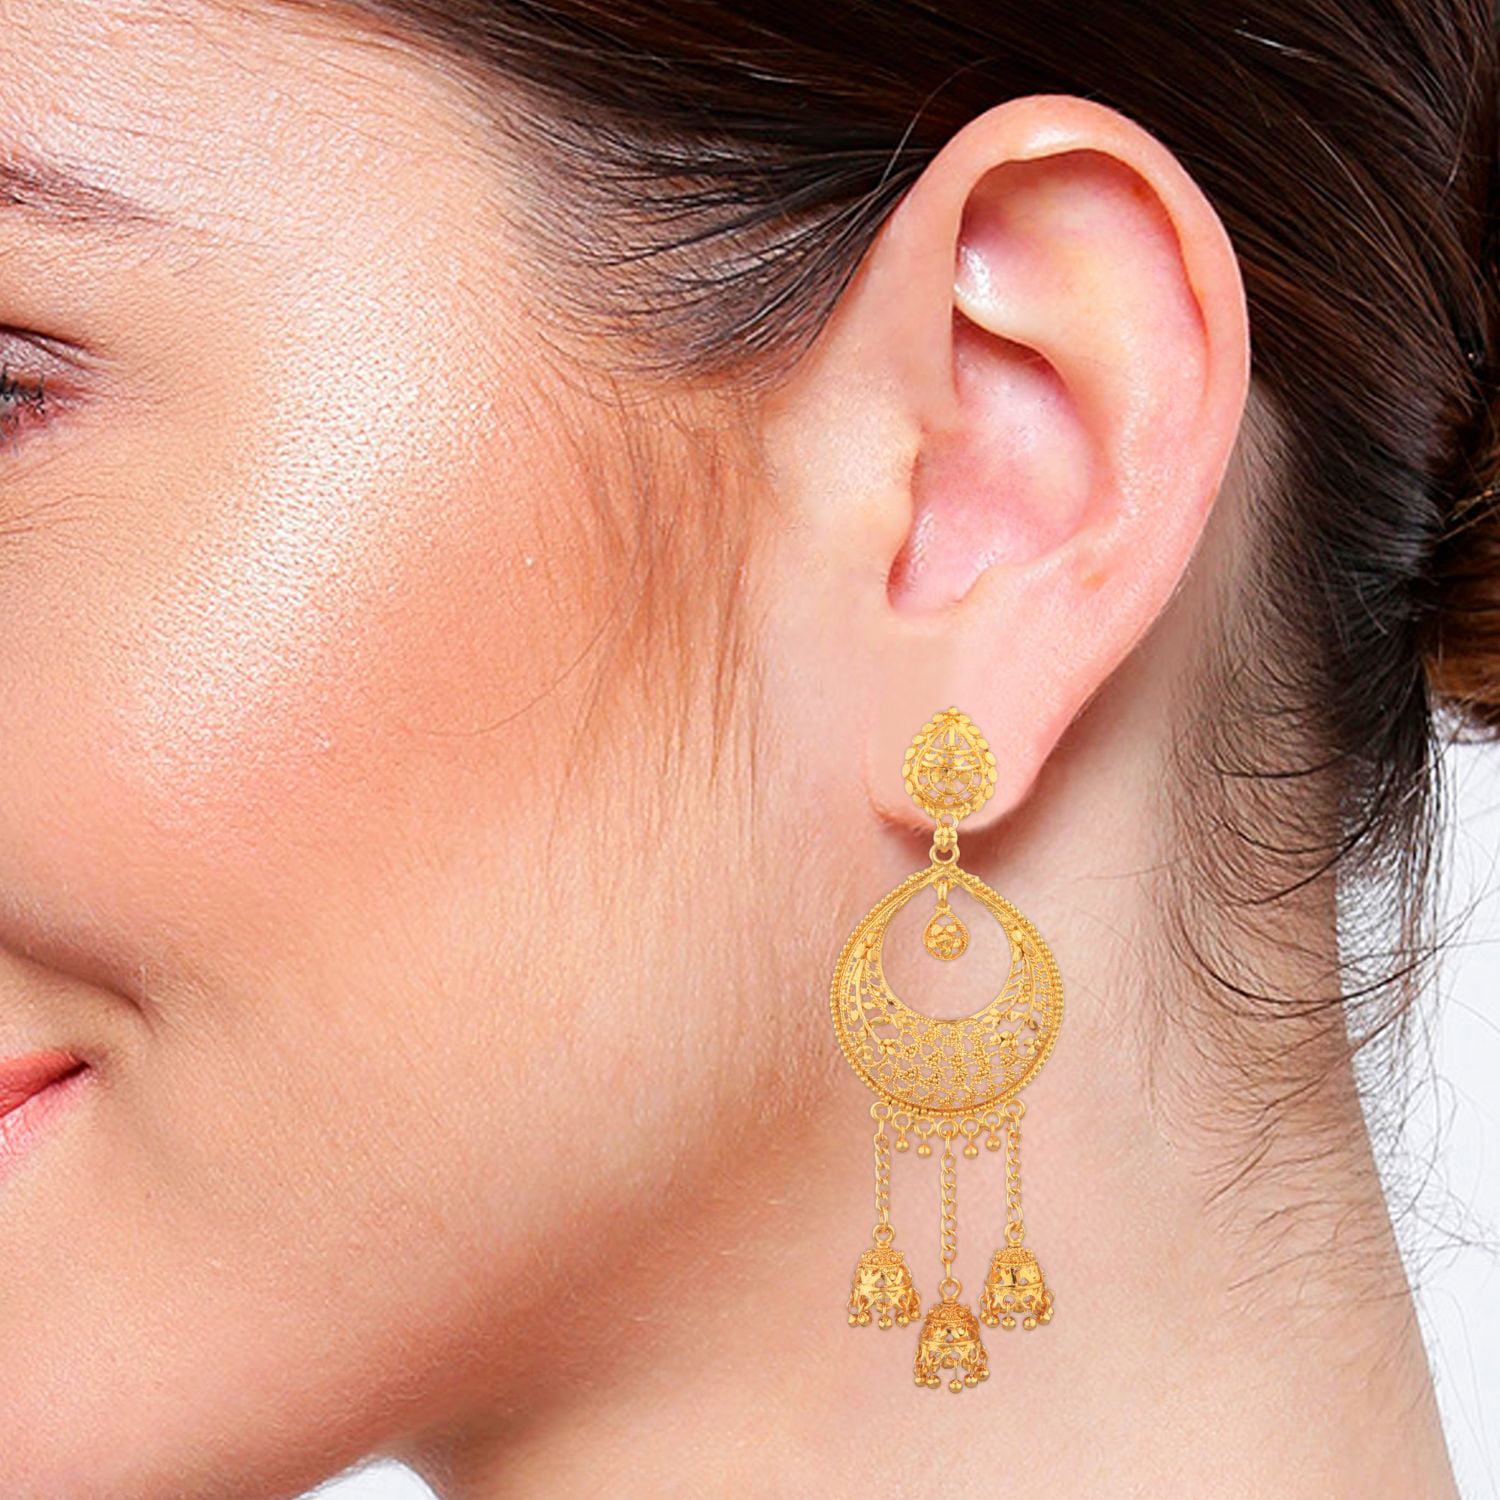 Gold Chandbali Earrings With Centered Pearl Drop – Bollywood Wardrobe